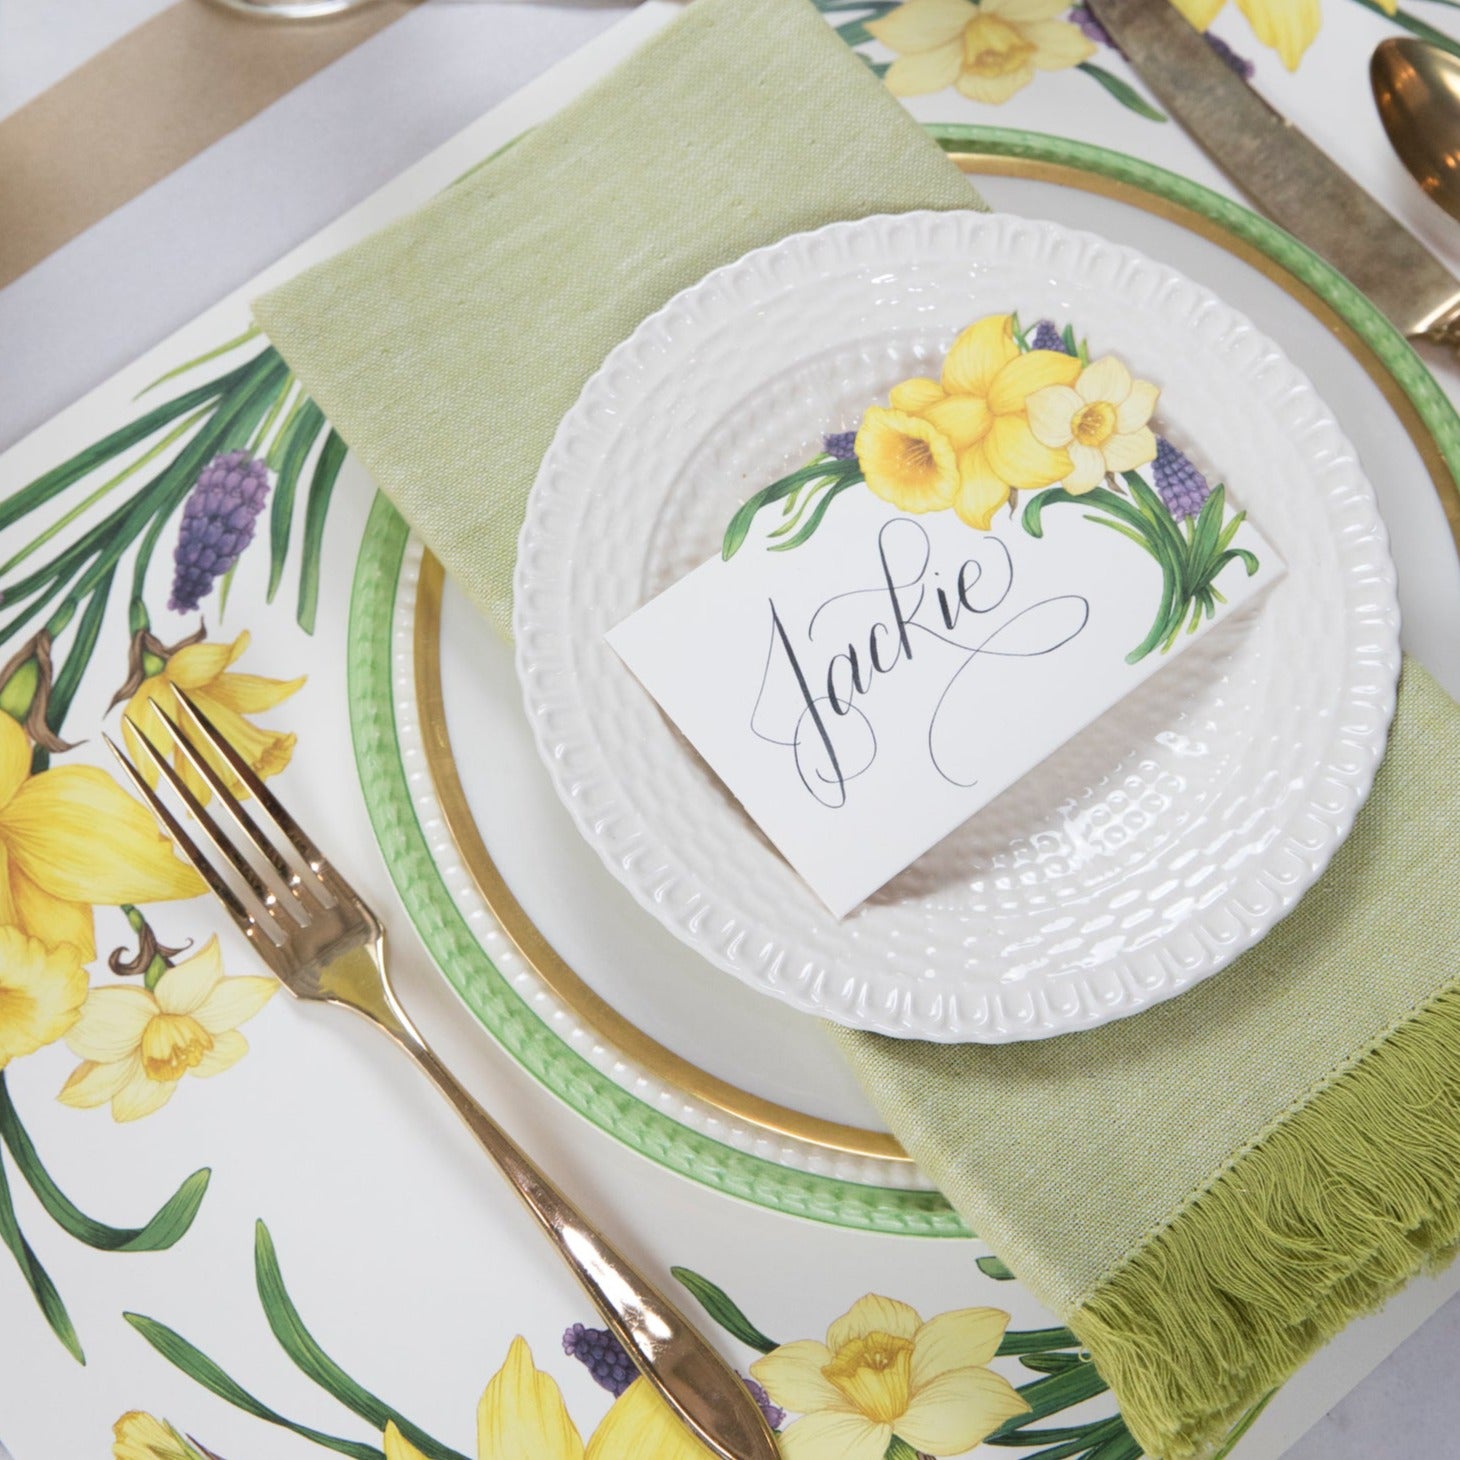 A Hester &amp; Cook Daffodil Place Card reading &quot;Jackie&quot; laying flat on a plate in an elegant place setting.